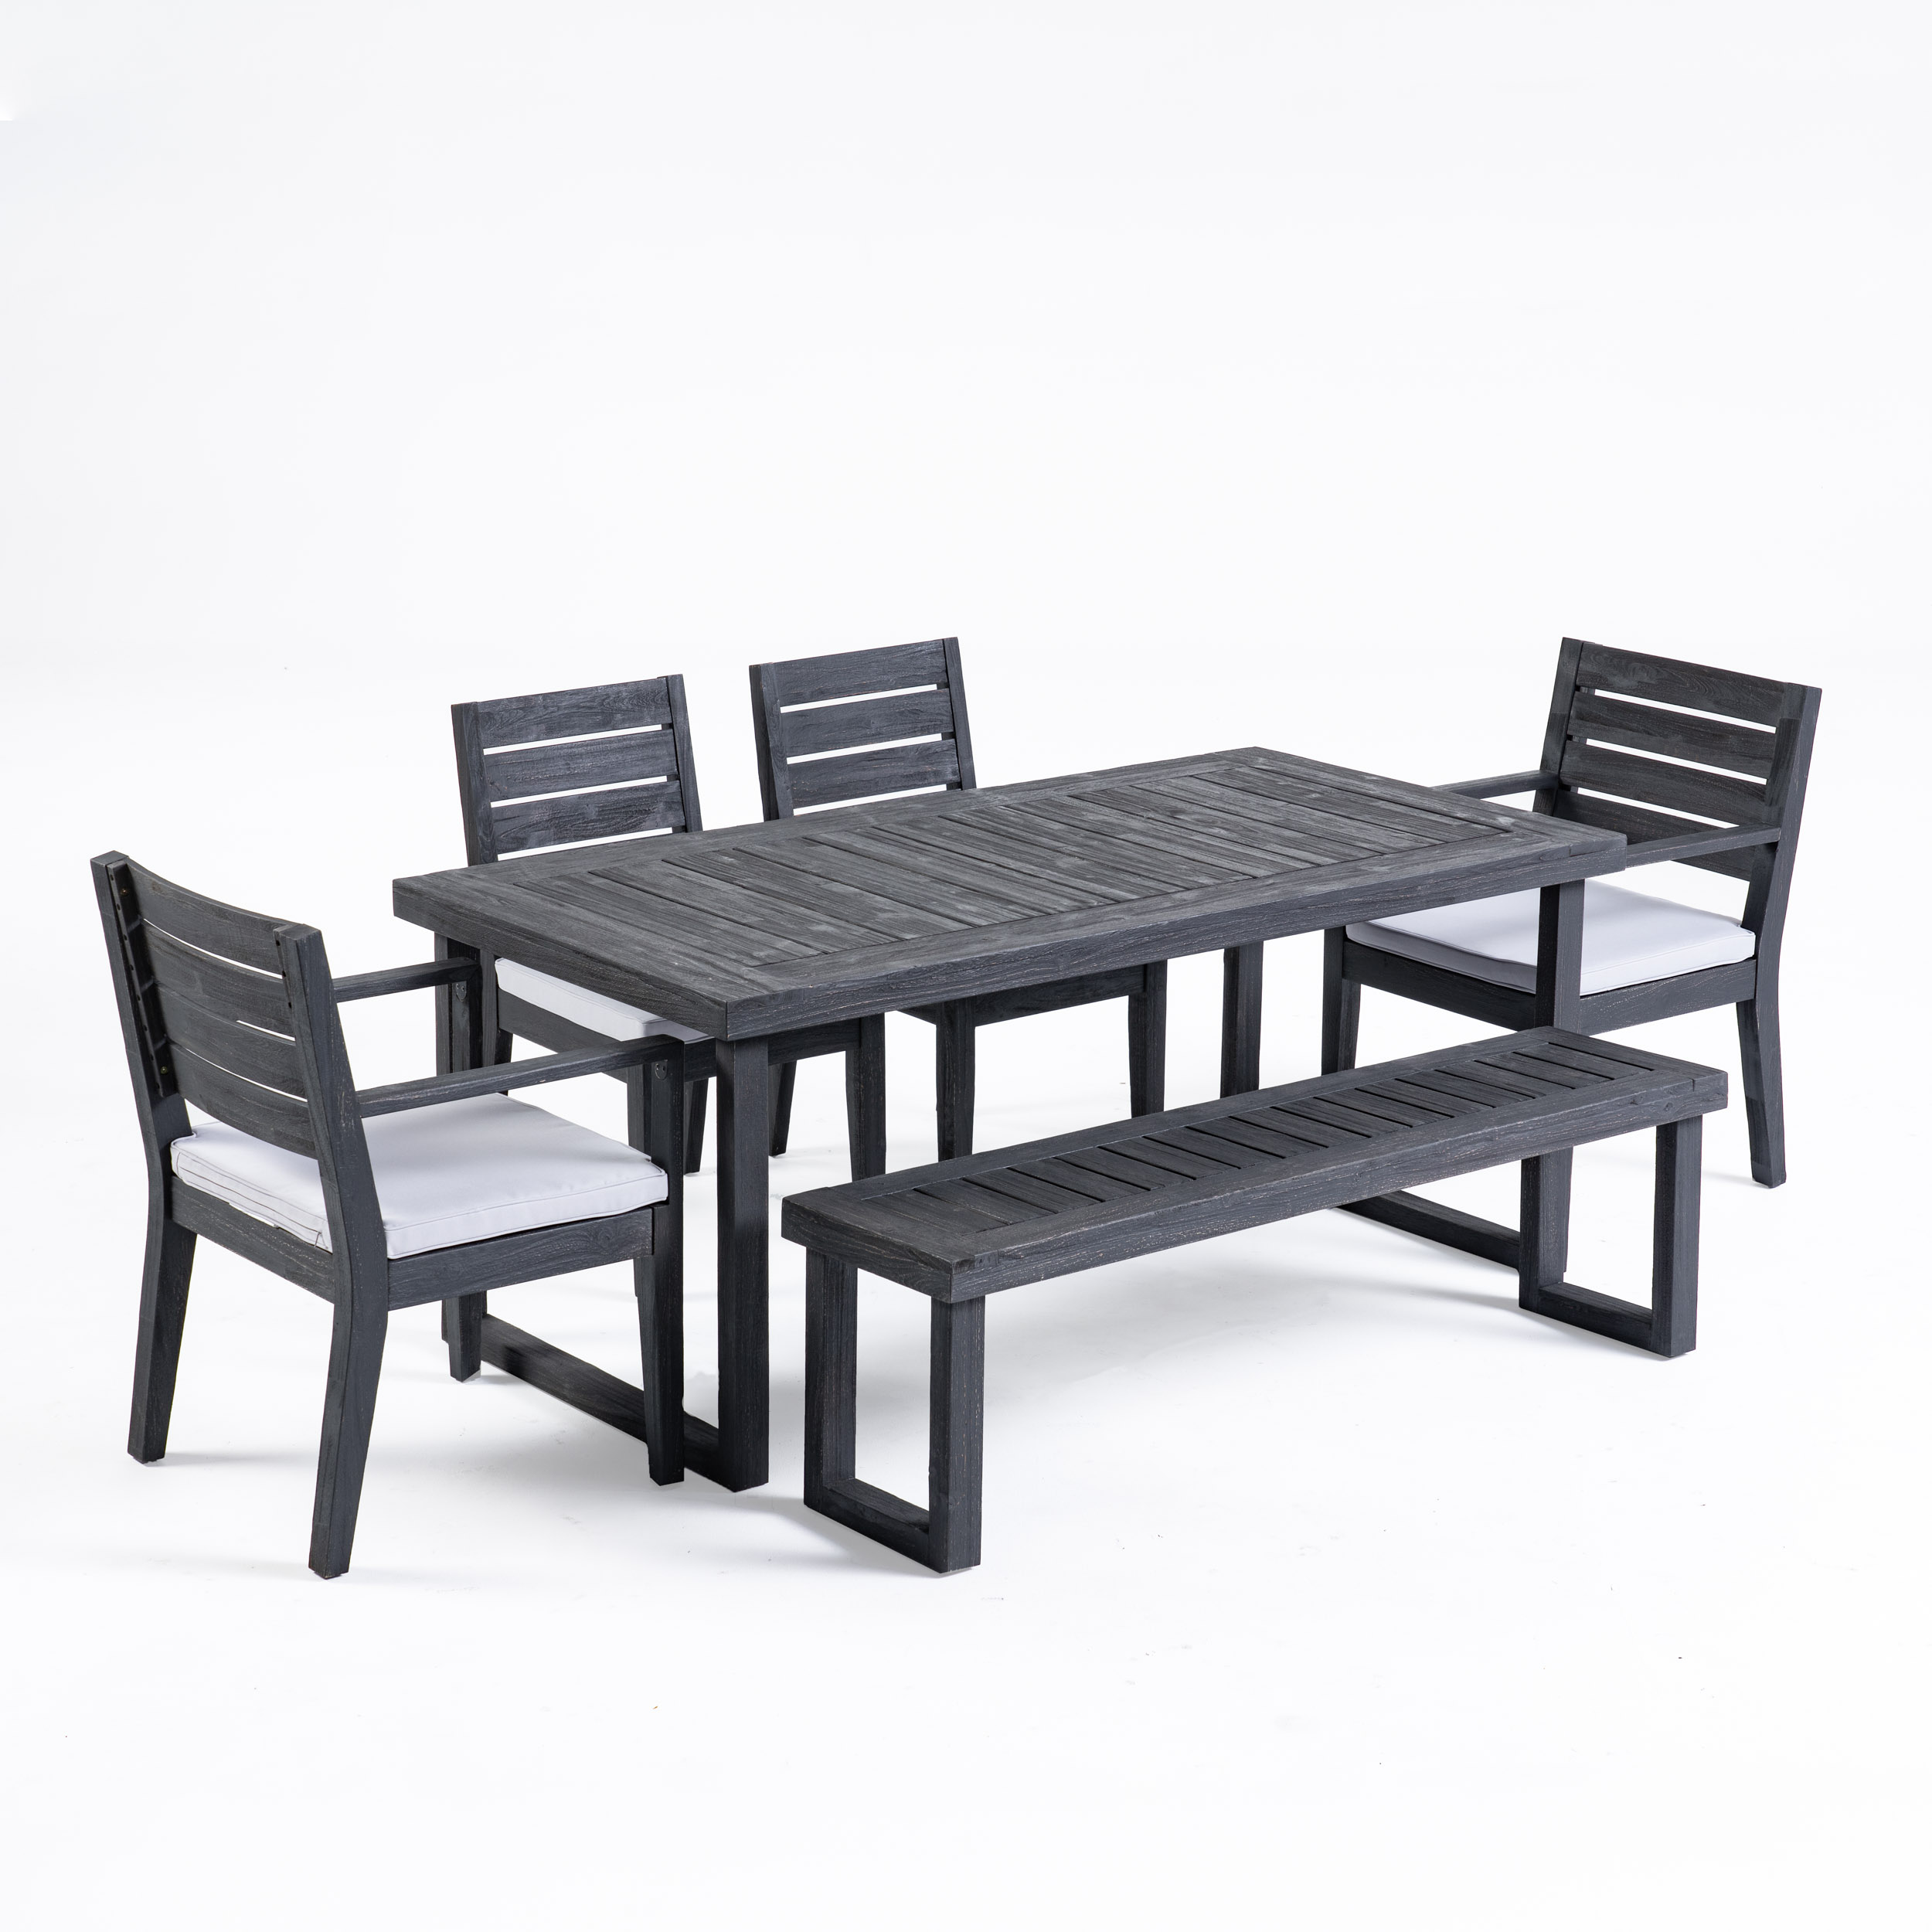 GDF Studio Agnew Outdoor Acacia Wood 6 Piece Dining Set with Bench, Sandblasted Dark Gray and Light Gray - image 1 of 12